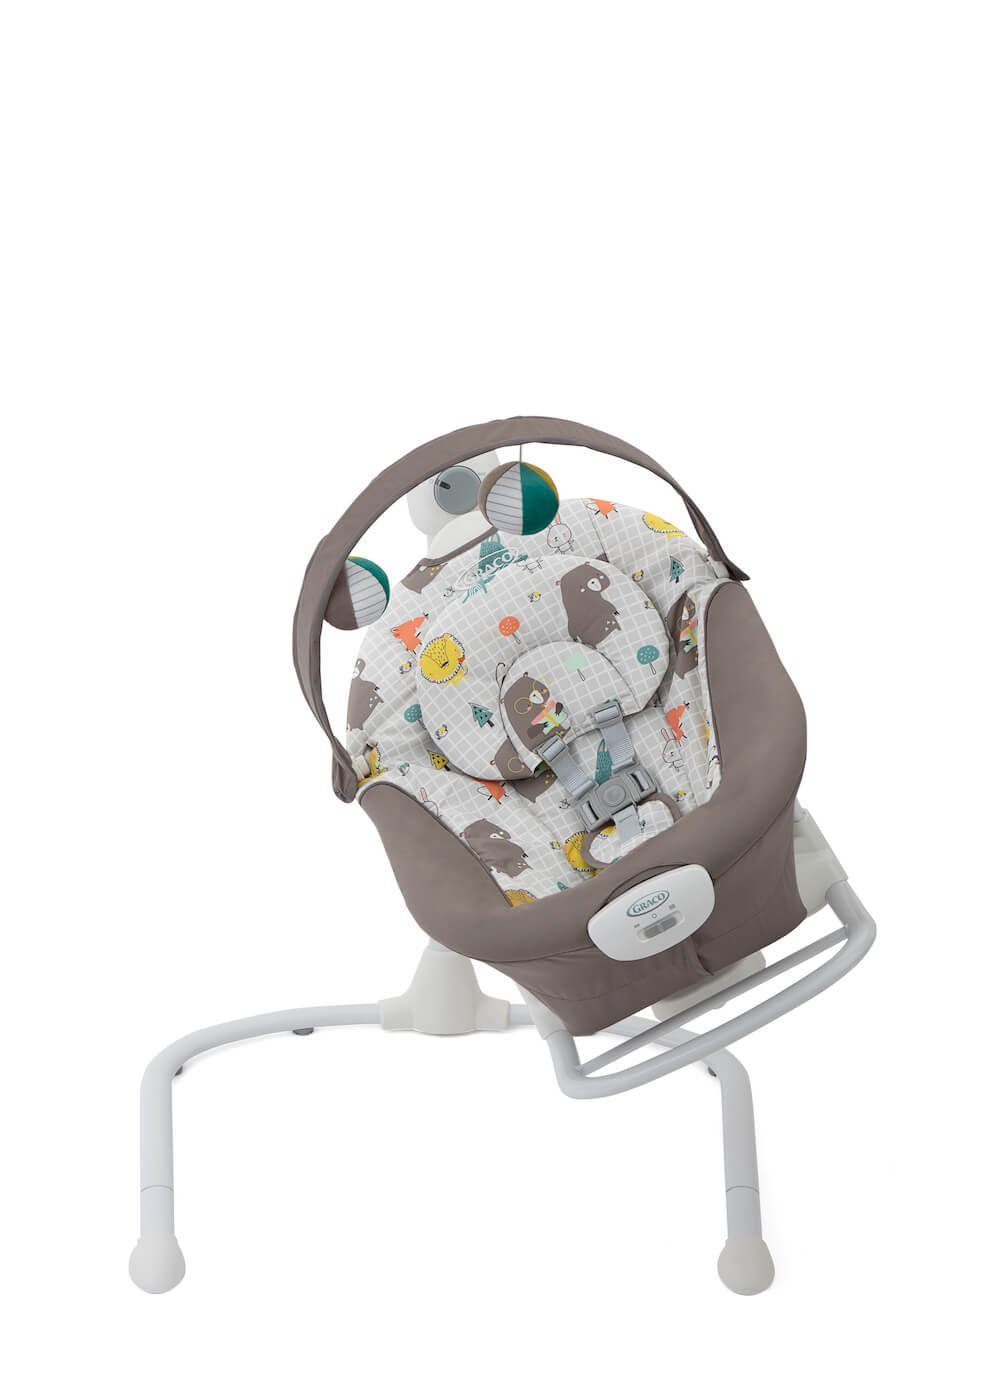 Babywippe Graco